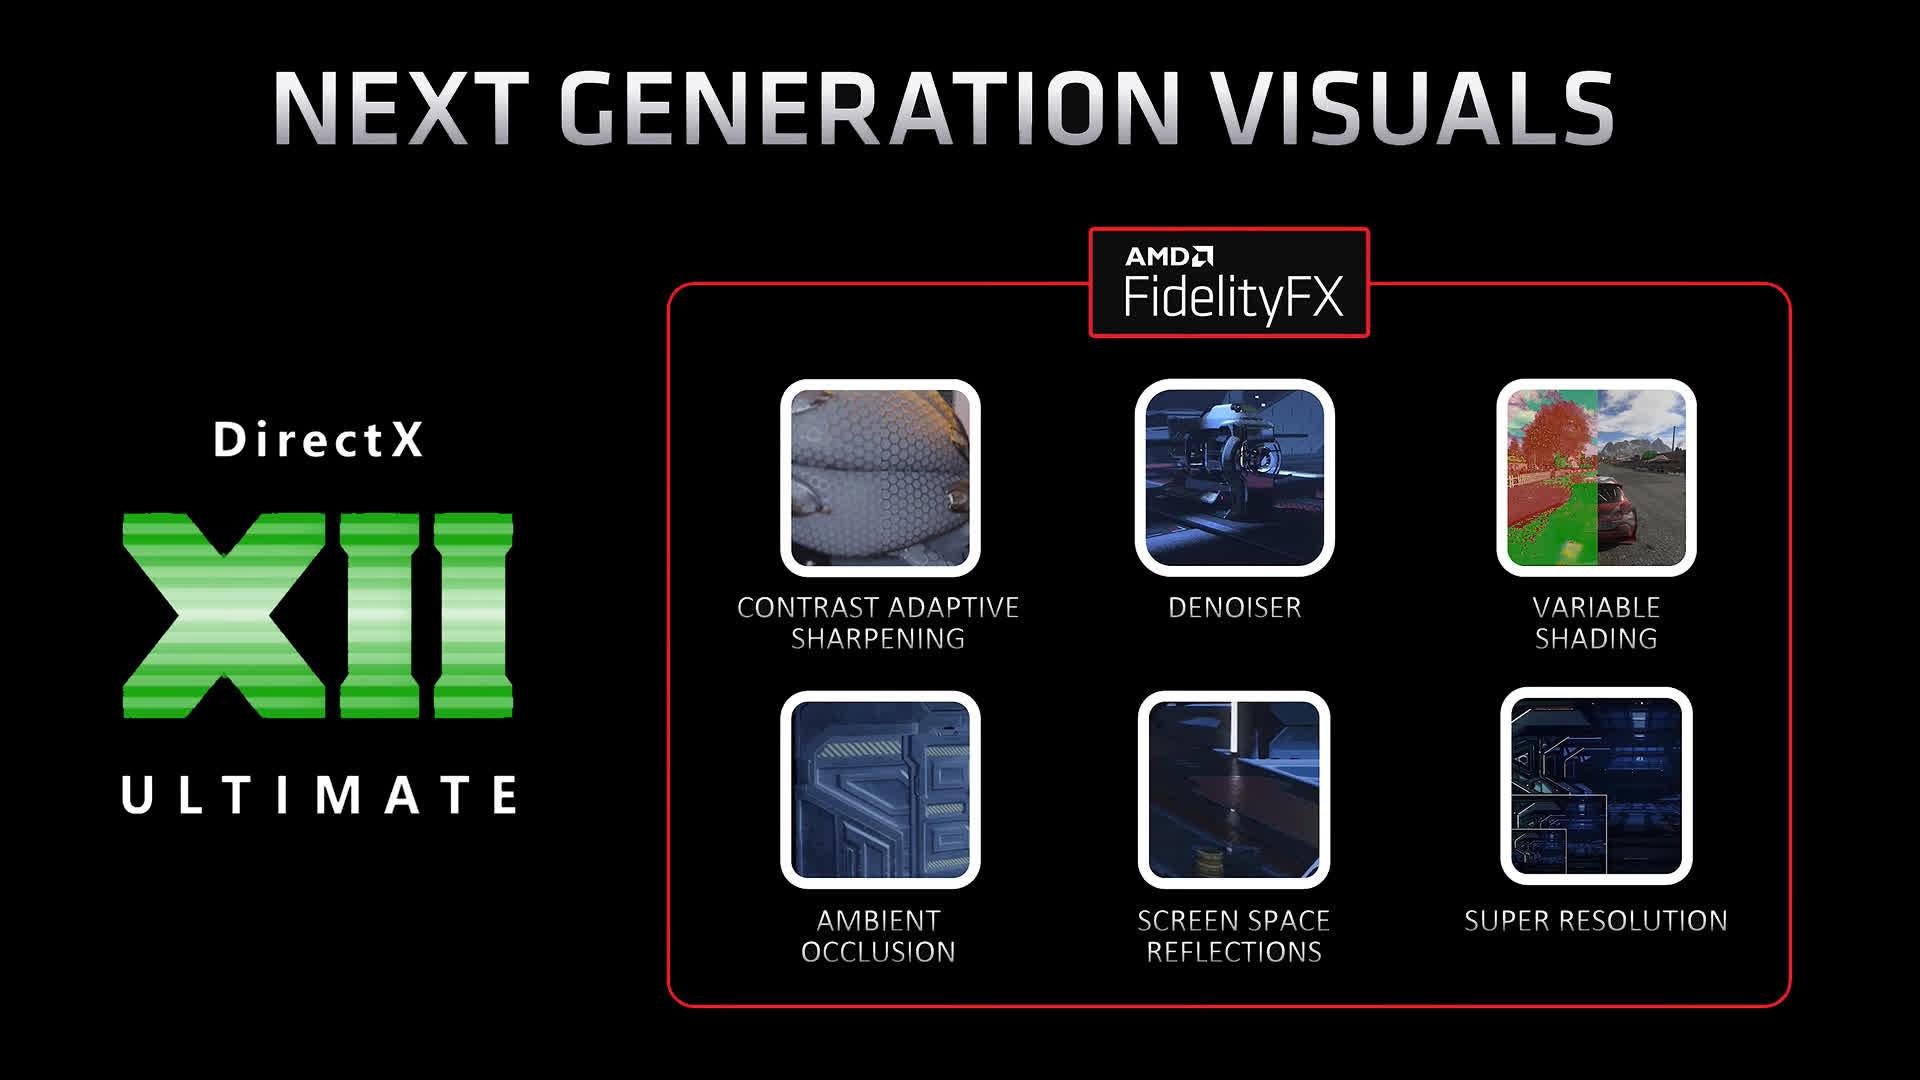 FidelityFX Super Resolution is AMD's answer to Nvidia's DLSS, set to debut this year